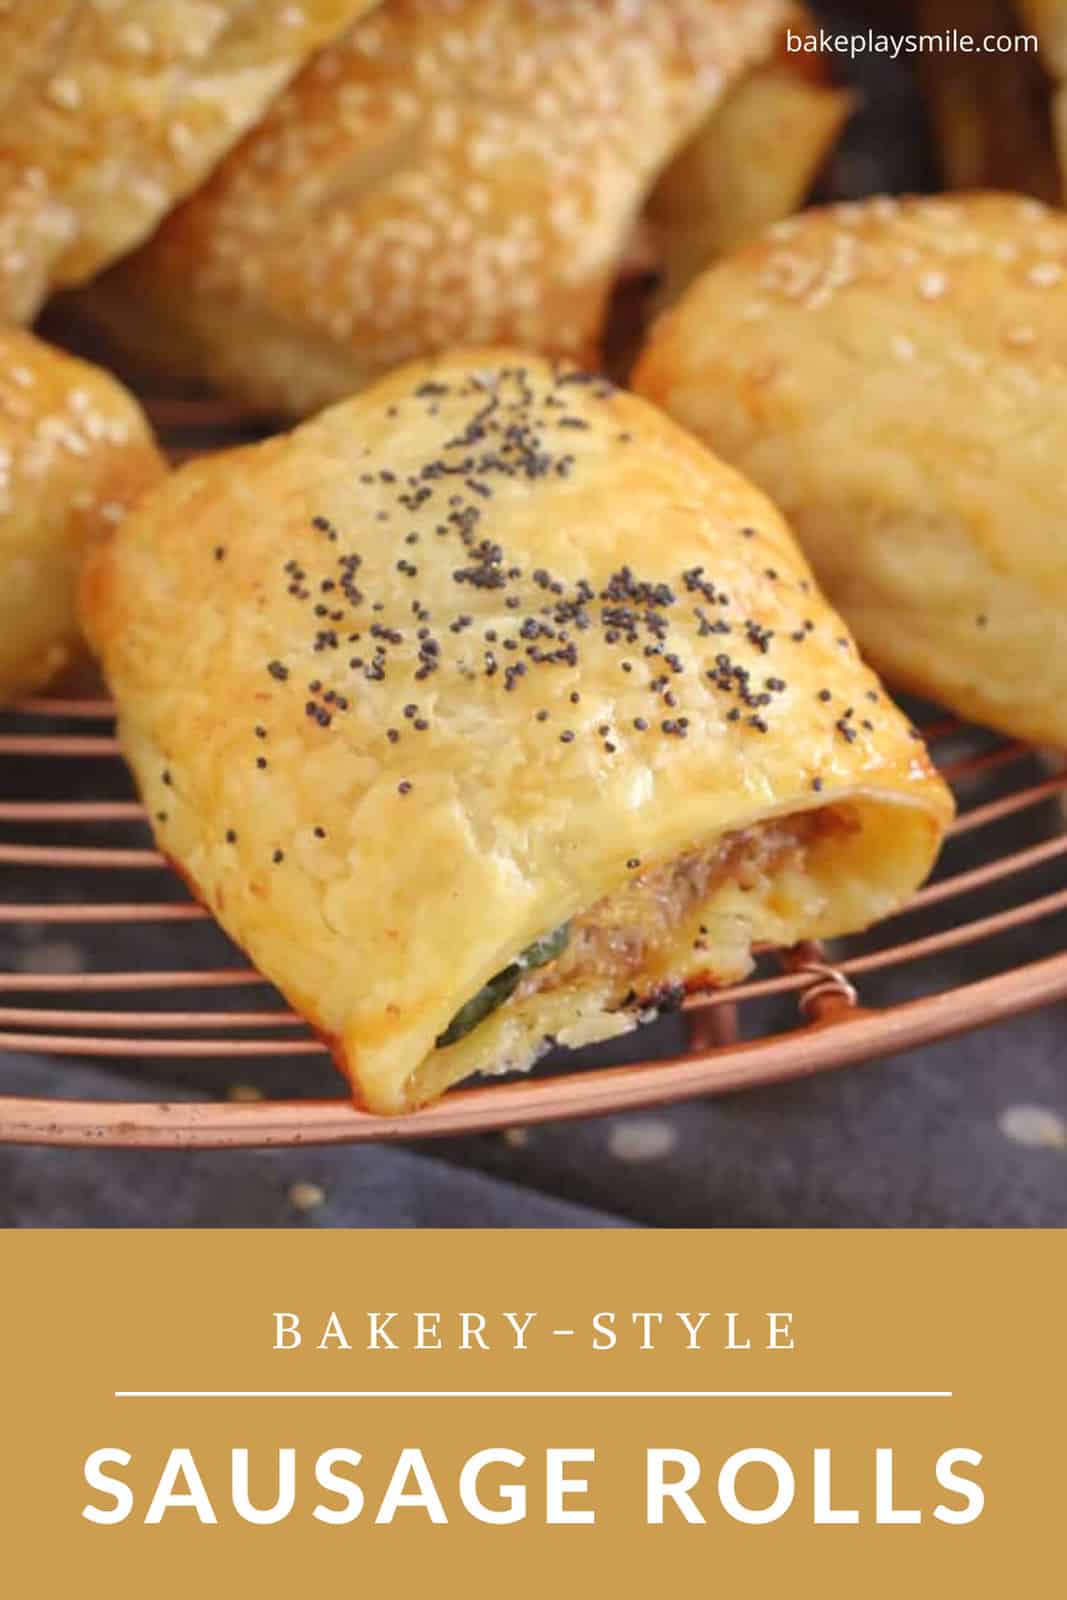 A bunch of golden sausage rolls sprinkled with poppy seeds on a copper wire rack.